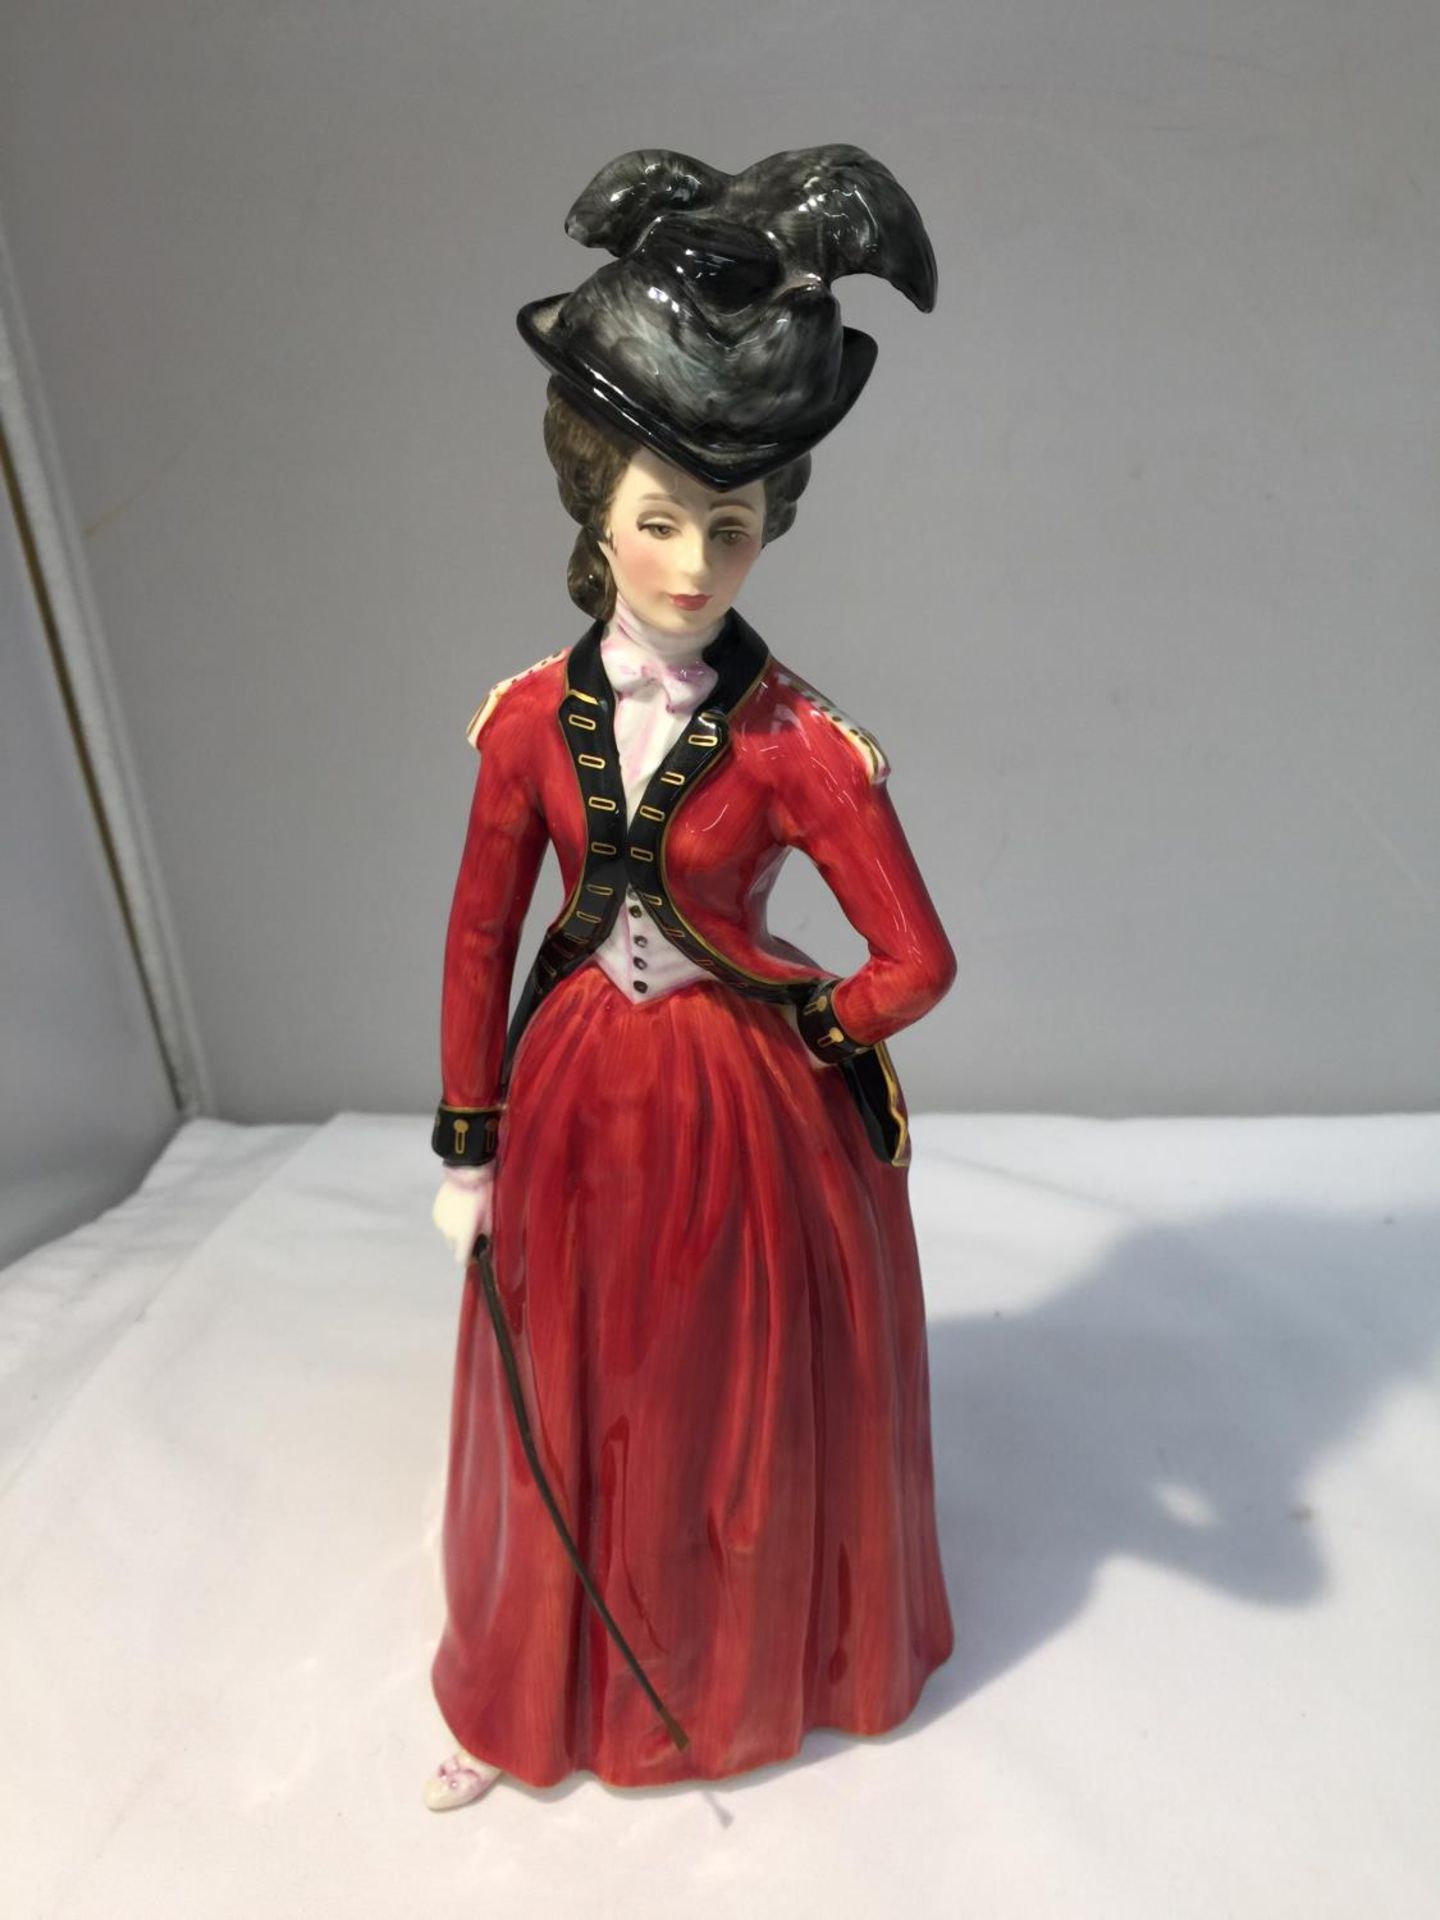 A ROYAL DOULTON FIGURE 'LADY WORSLEY' HN 3318, FROM A COLLECTION OF FOUR FIGURES, LIMITED EDITION